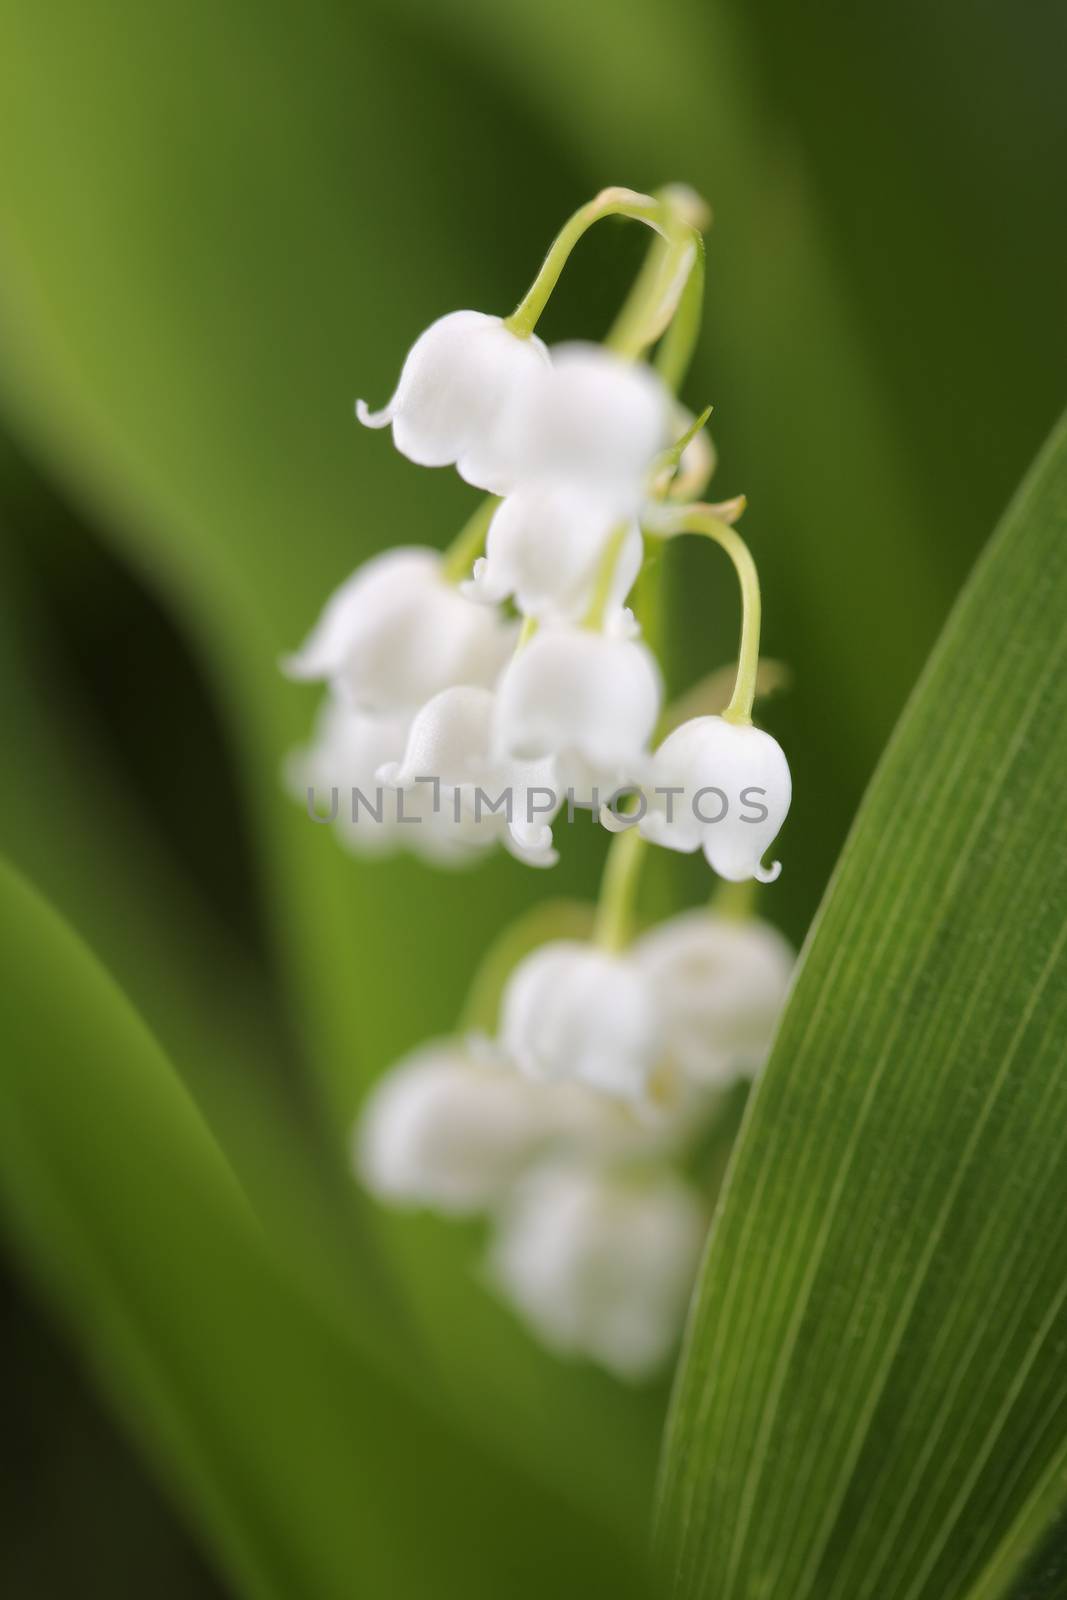 Lily of the valley (Convallaria majalis) is a sweetly scented, highly poisonous woodland flowering plant that is native throughout the cool temperate Northern Hemisphere in Asia, and Europe.